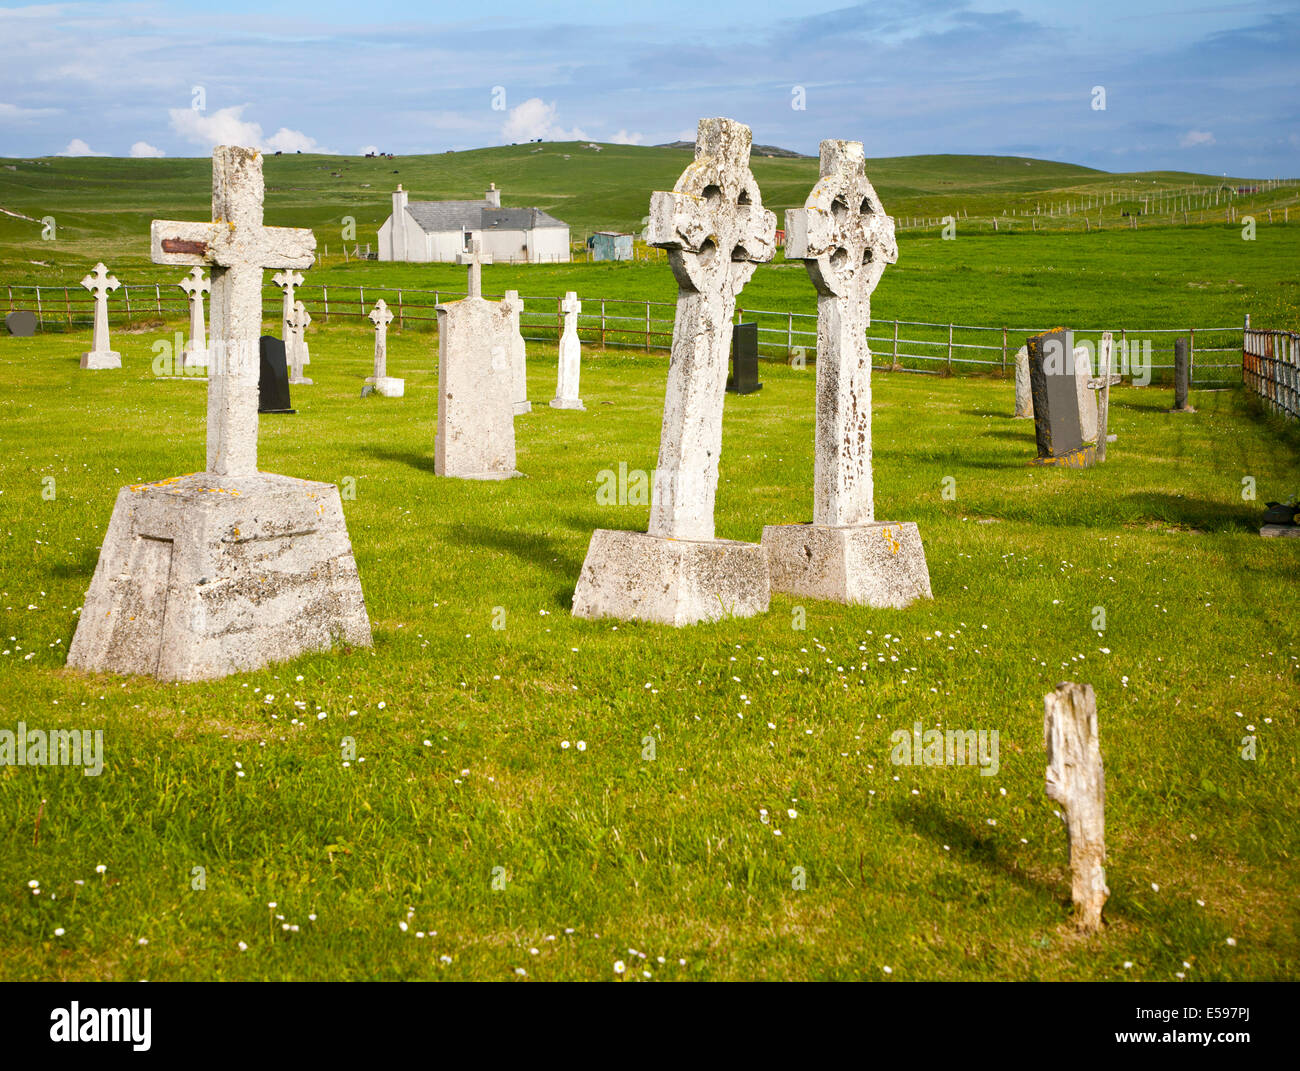 Gravestones in burial ground on Vatersay Island, Barra, Outer Hebrides, Scotland - two headstones leaning towards each other Stock Photo